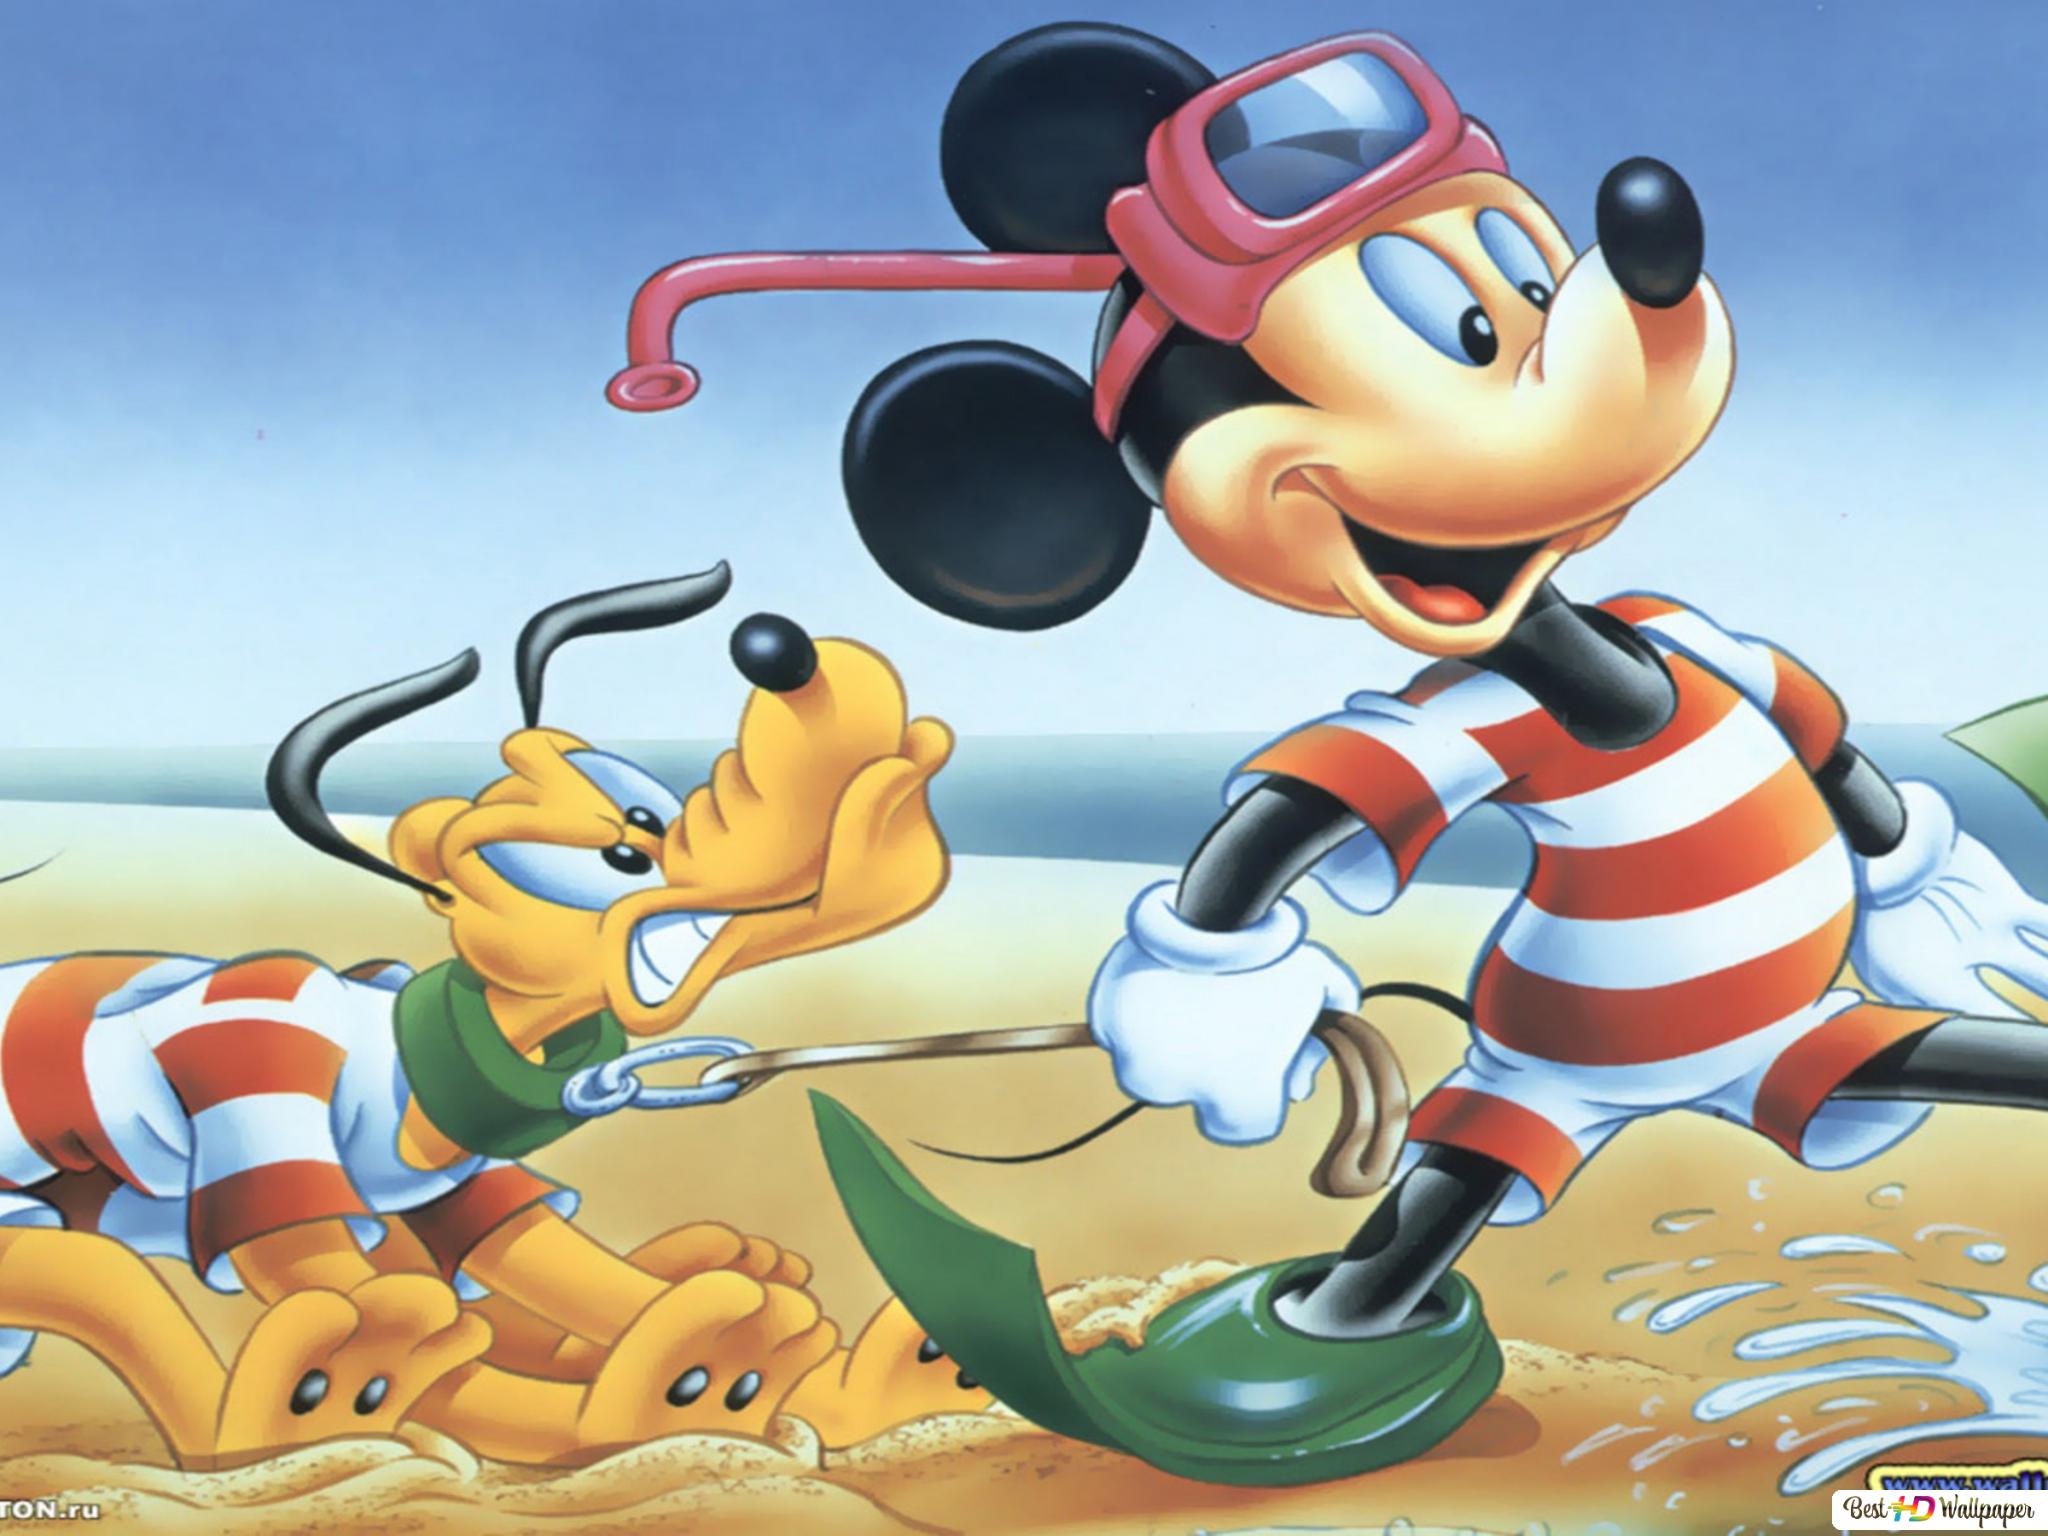 Disney mickey mouse and pluto disney characters sea beach bathing HD wallpaper download